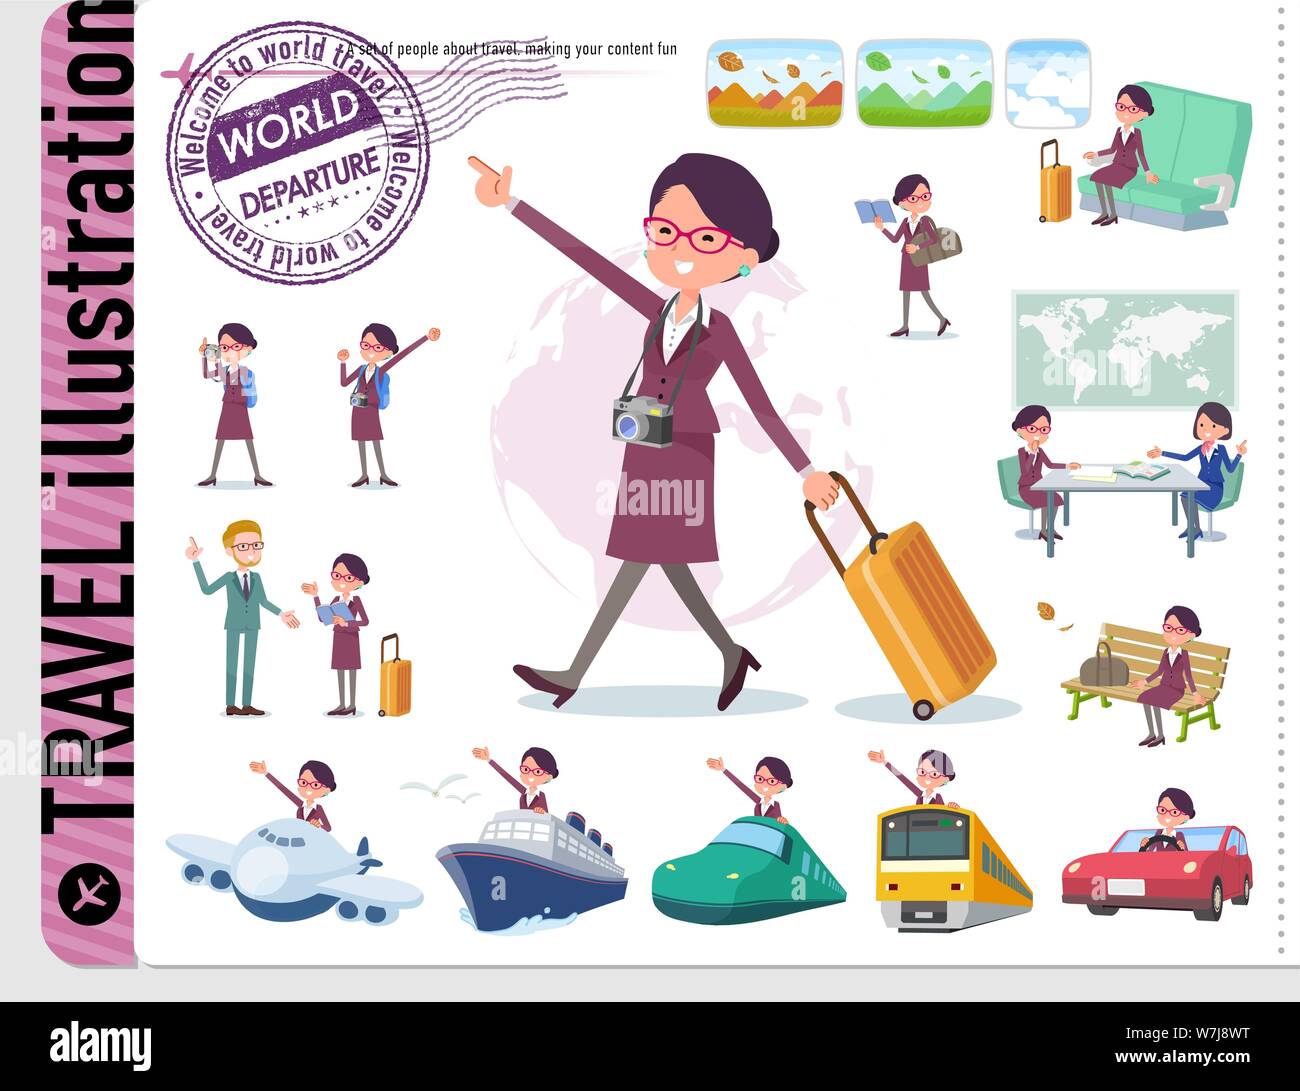 A set of women on travel.There are also vehicles such as boats and airplanes.It's vector art so it's easy to edit. Stock Vector